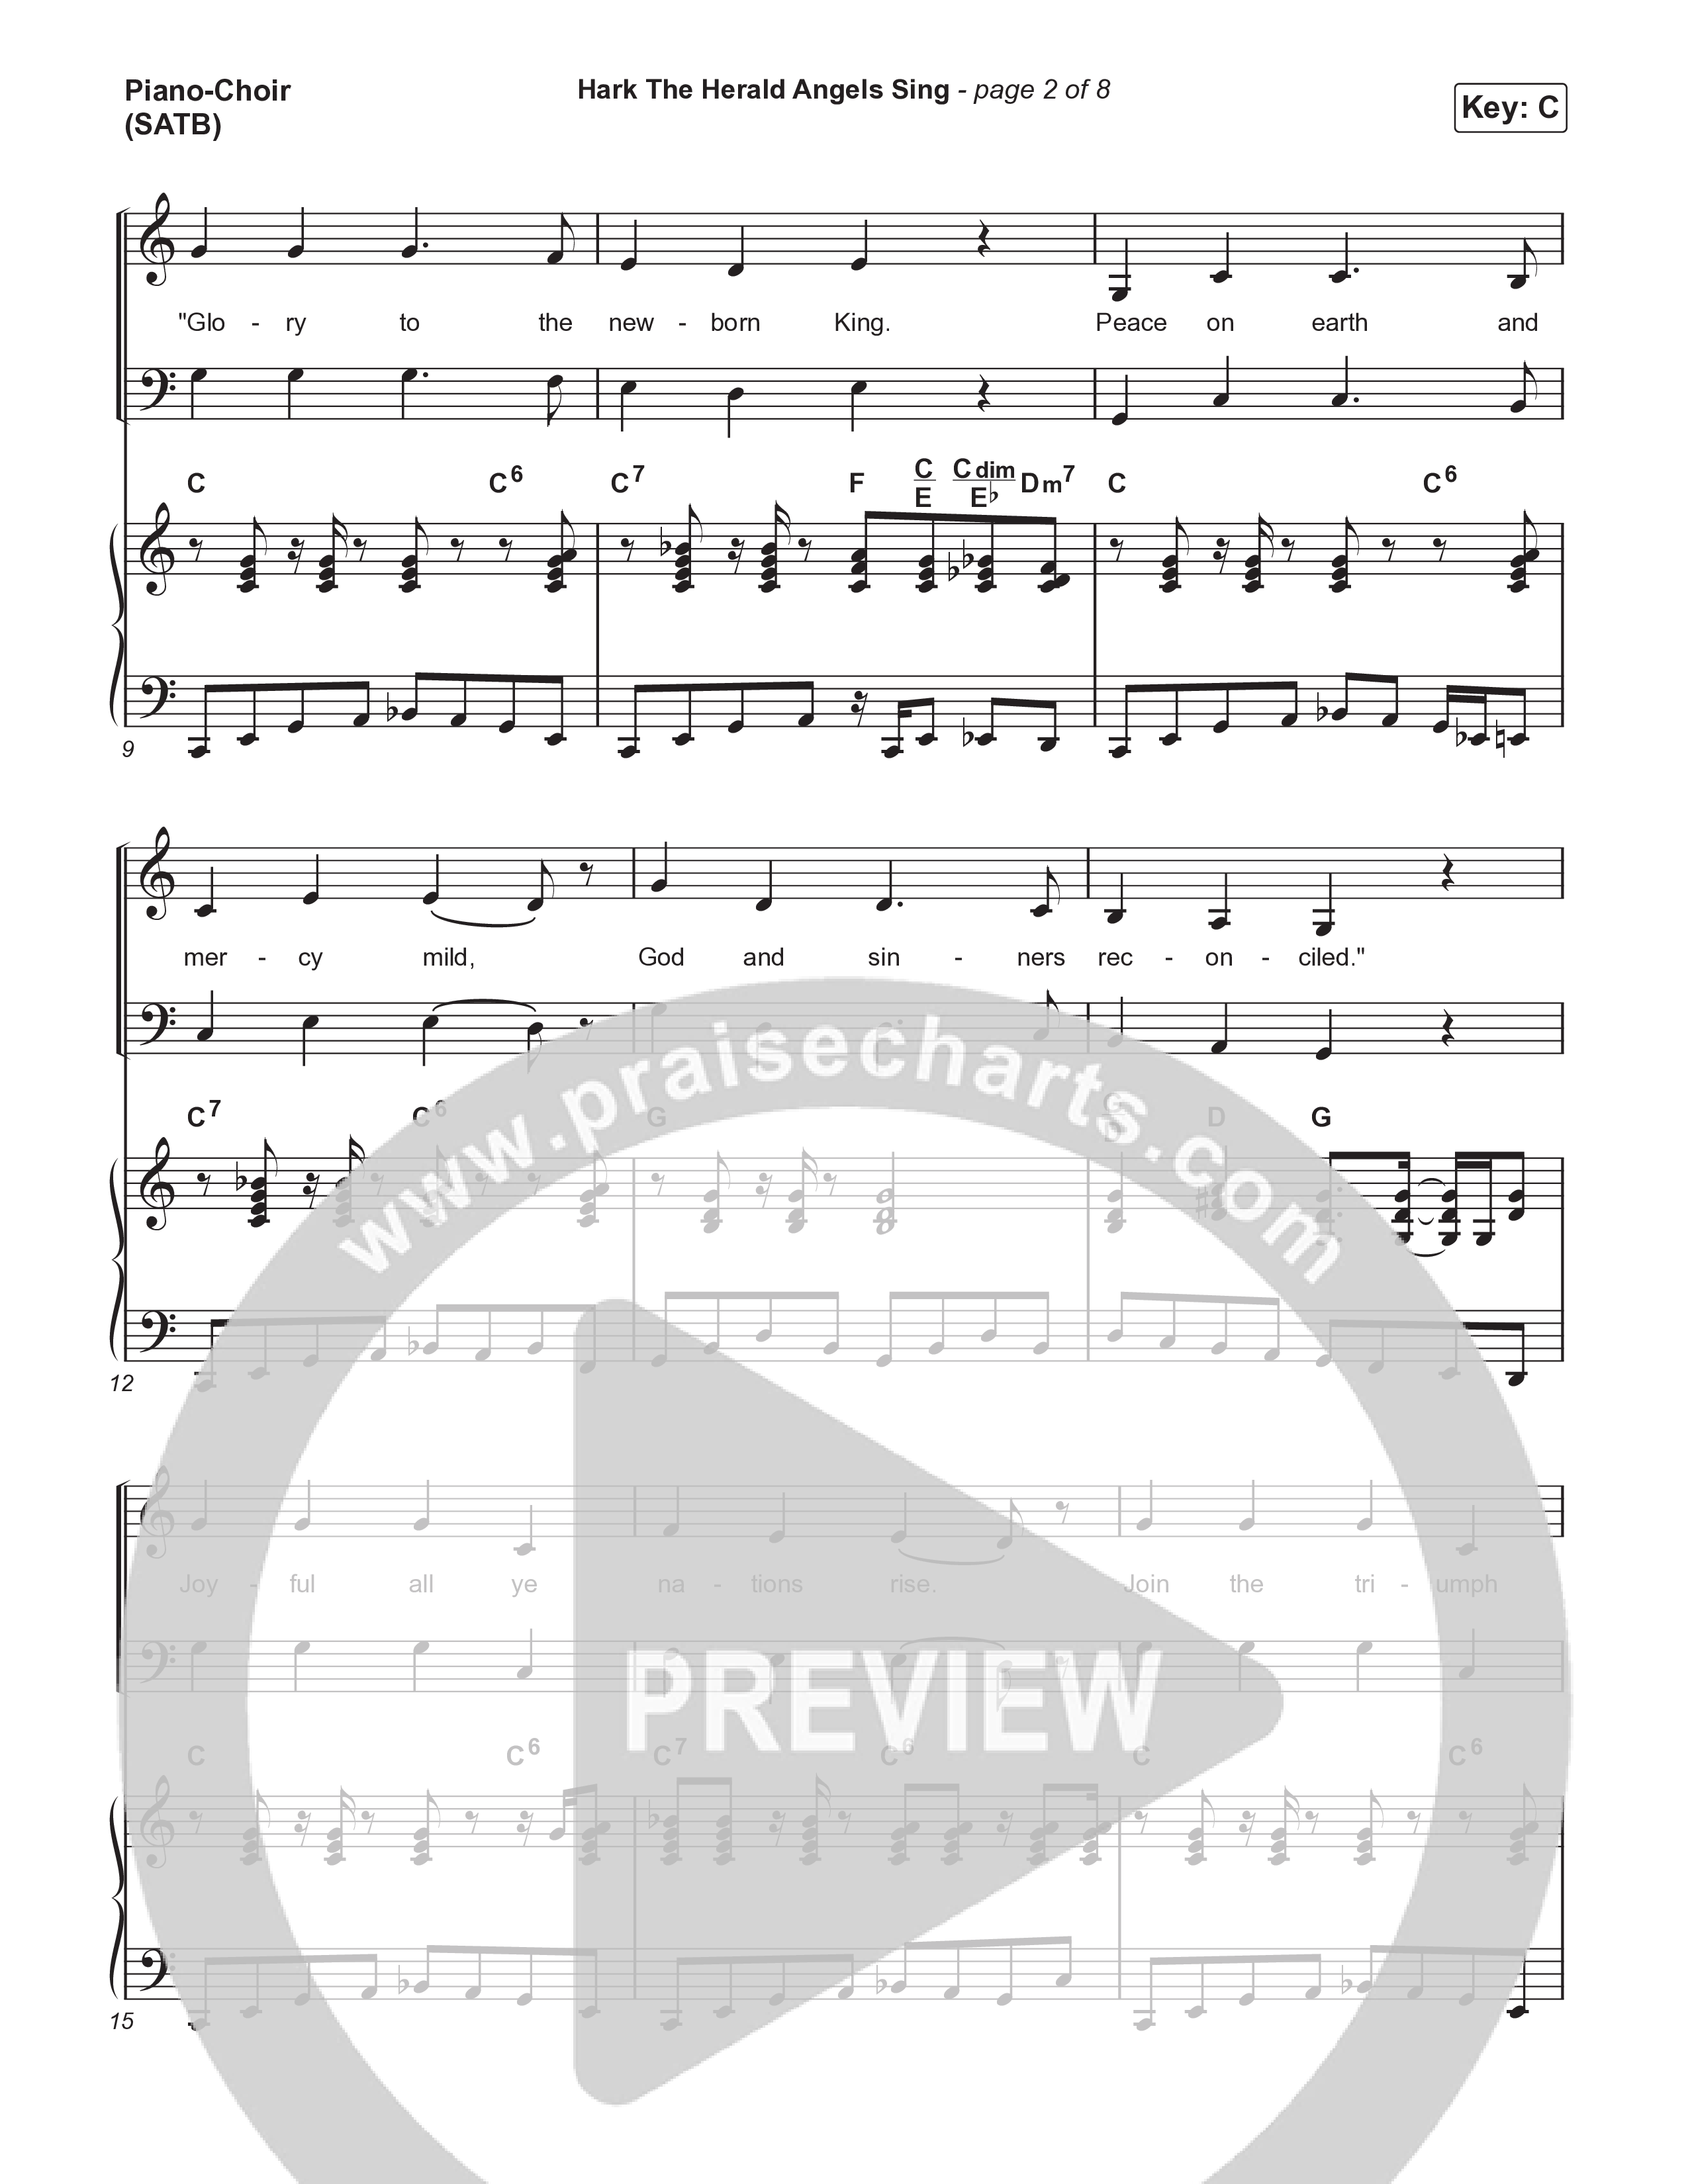 Hark The Herald Angels Sing Piano/Vocal (SATB) (CCV Music)